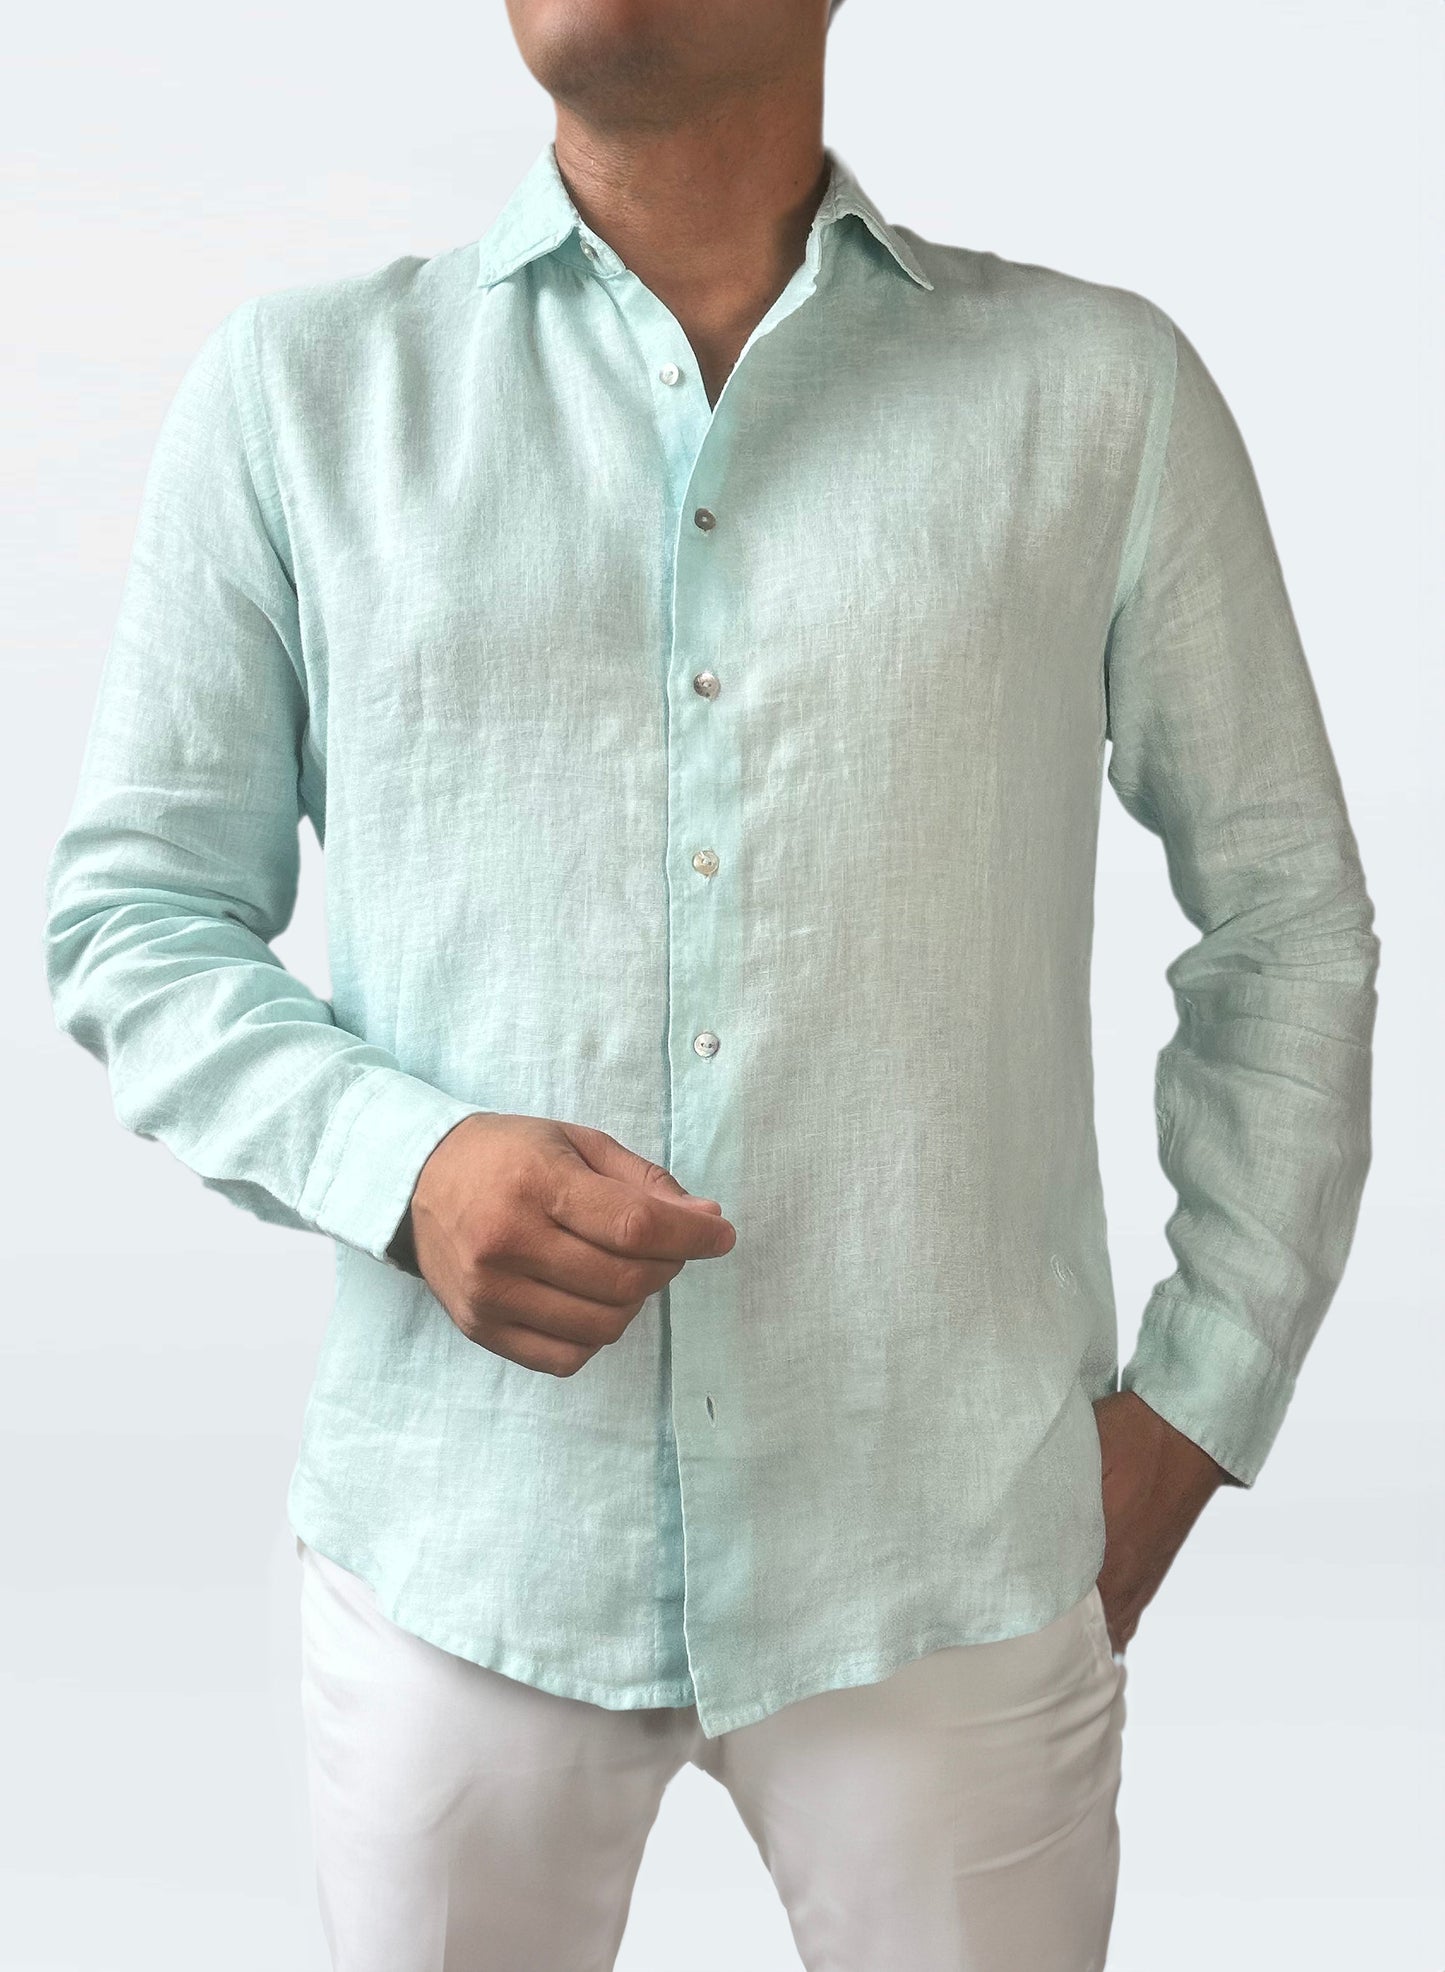 Turquoise 100% linen unisex shirt with mother-of-pearl buttons